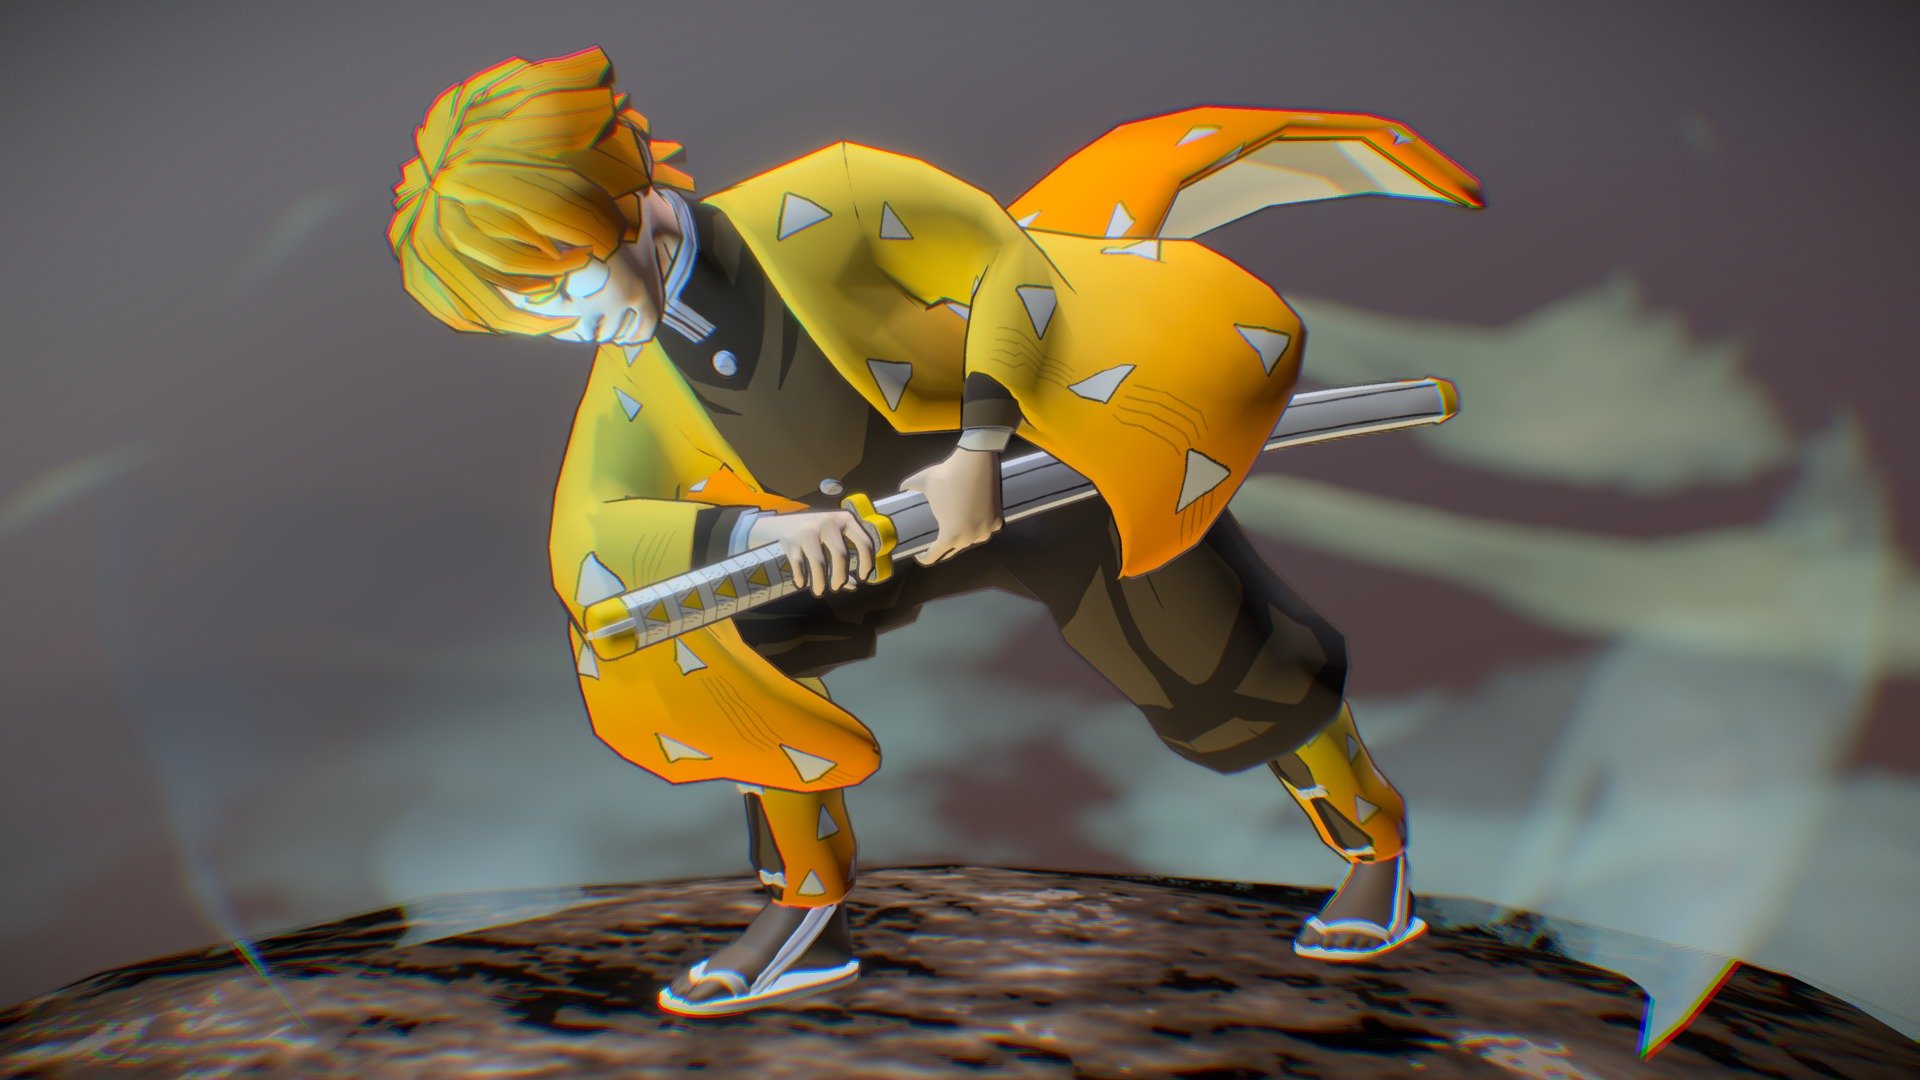 Zenitsu Agatsuma from the series Demon Slayer, or Kimetsu no Yaiba.
The piece is based on his signature move, just before he delivers the decisive blow.
Hand painted in Photoshop, and modeled in Maya 3d model